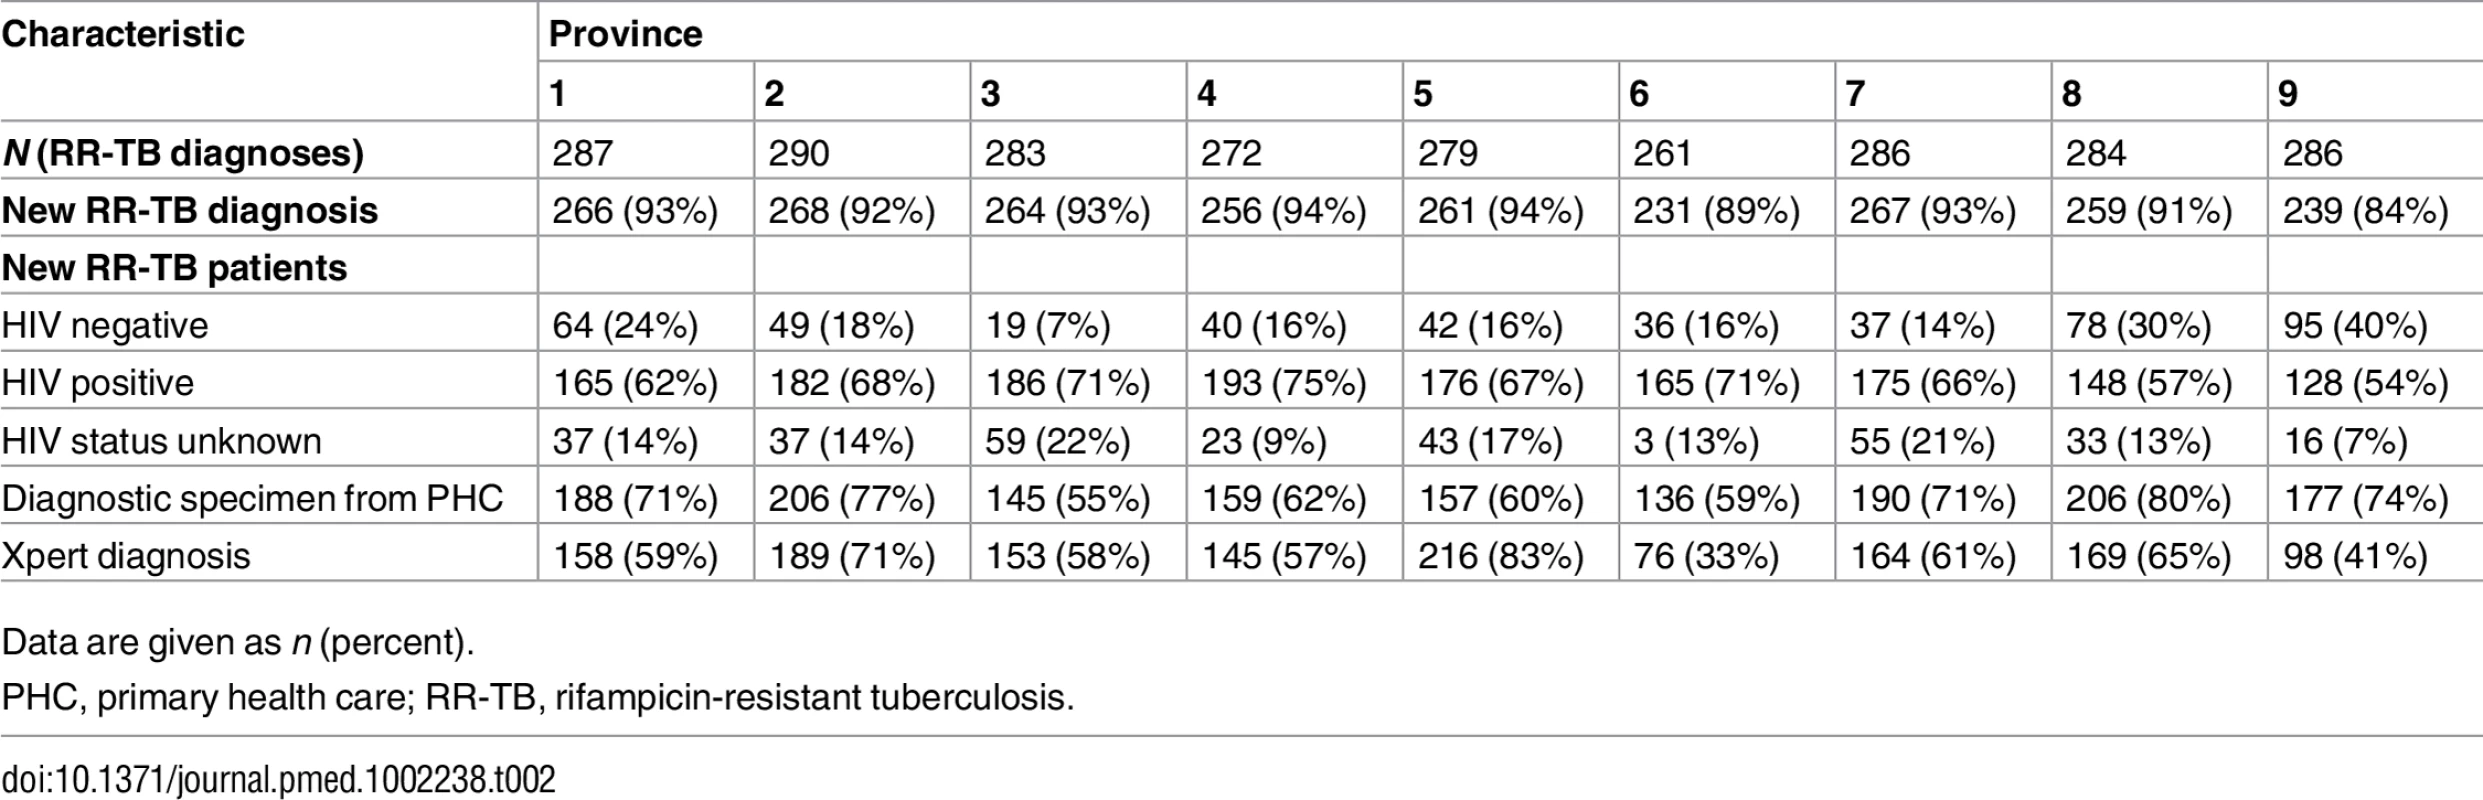 New rifampicin-resistant tuberculosis patients and their HIV status, diagnosing facility, and Xpert diagnosis across the nine South African provinces (2013 cohort).